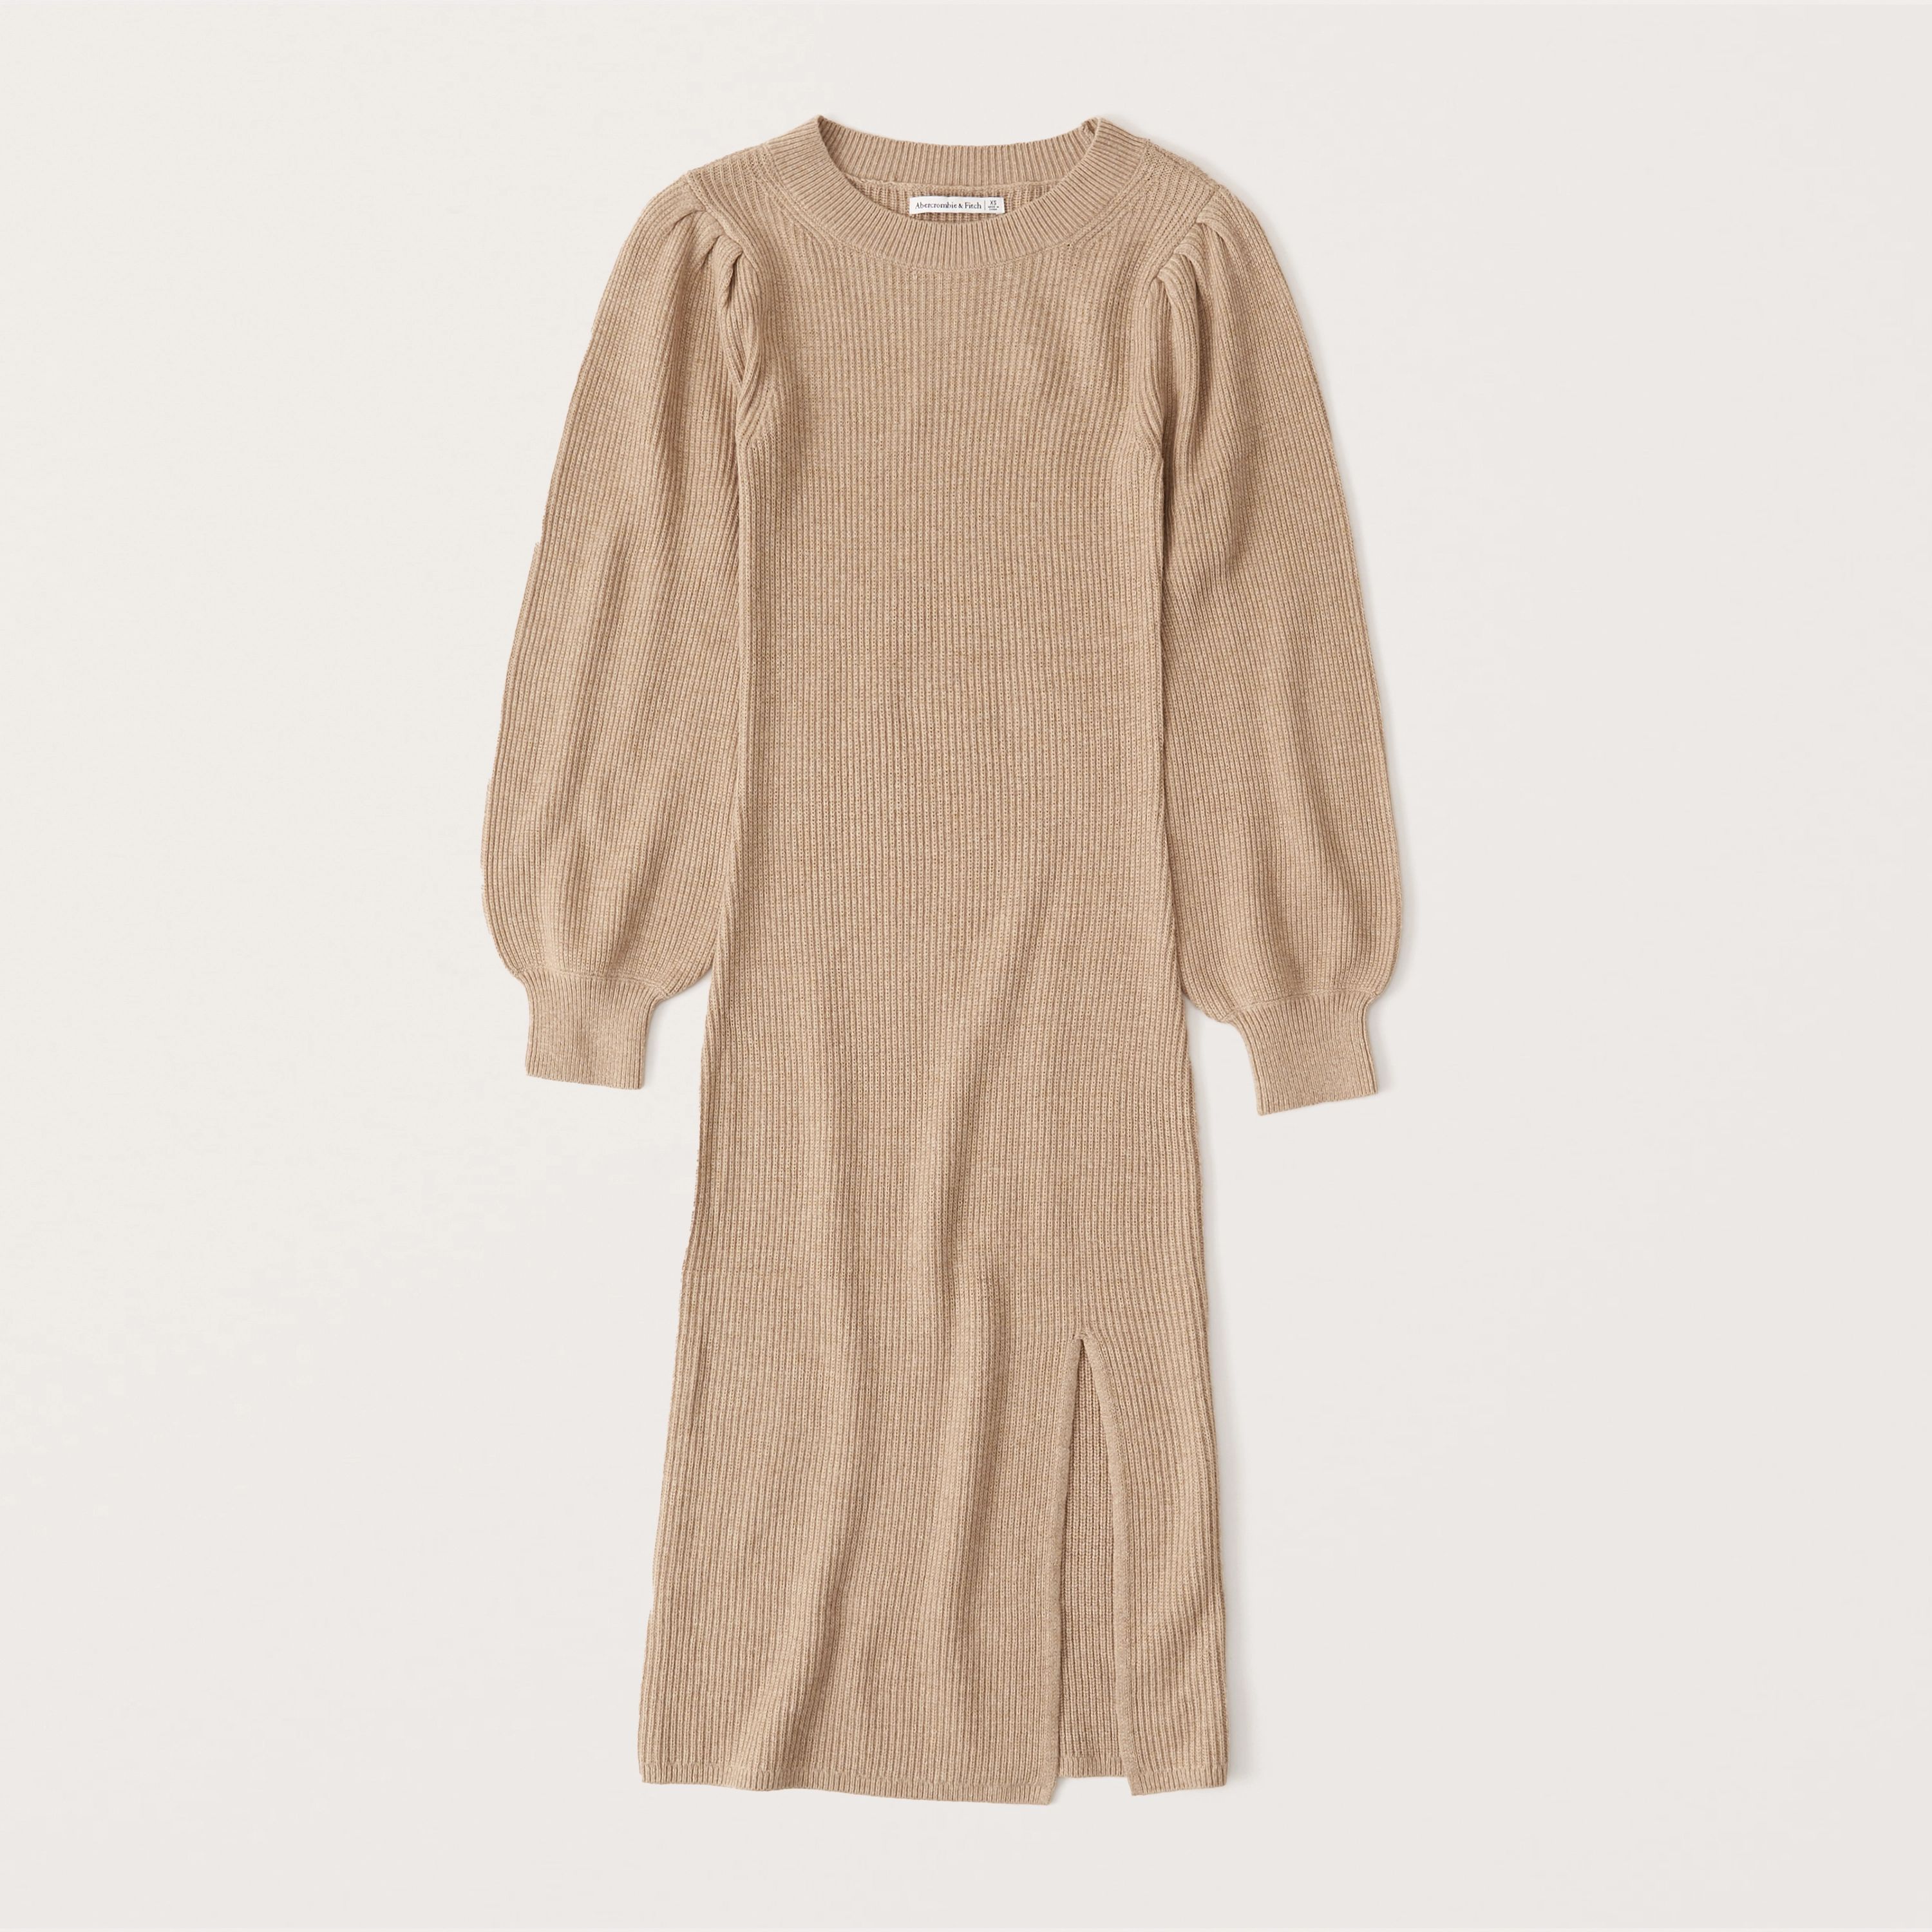 Ribbed Puff Sleeve Midi Sweater Dress
					



		
	



	
		Exchange Color / Size
	


	

	

	
		

... | Abercrombie & Fitch (US)